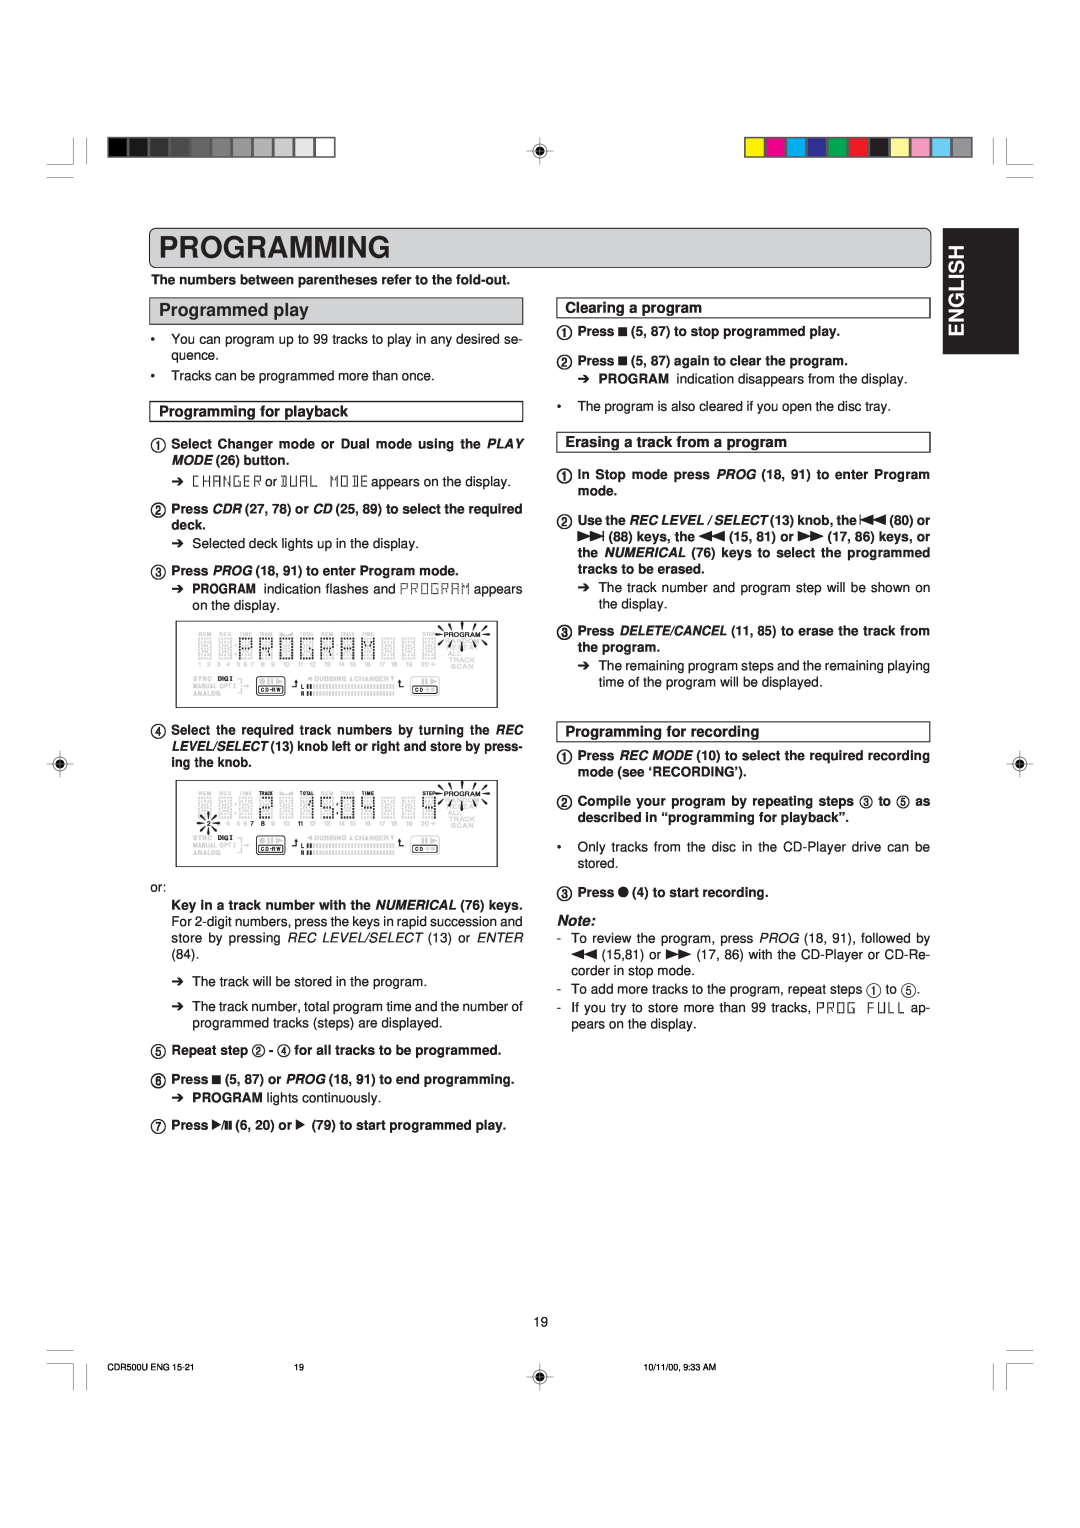 Marantz CDR500 manual English, Programming for playback, Clearing a program, Erasing a track from a program 